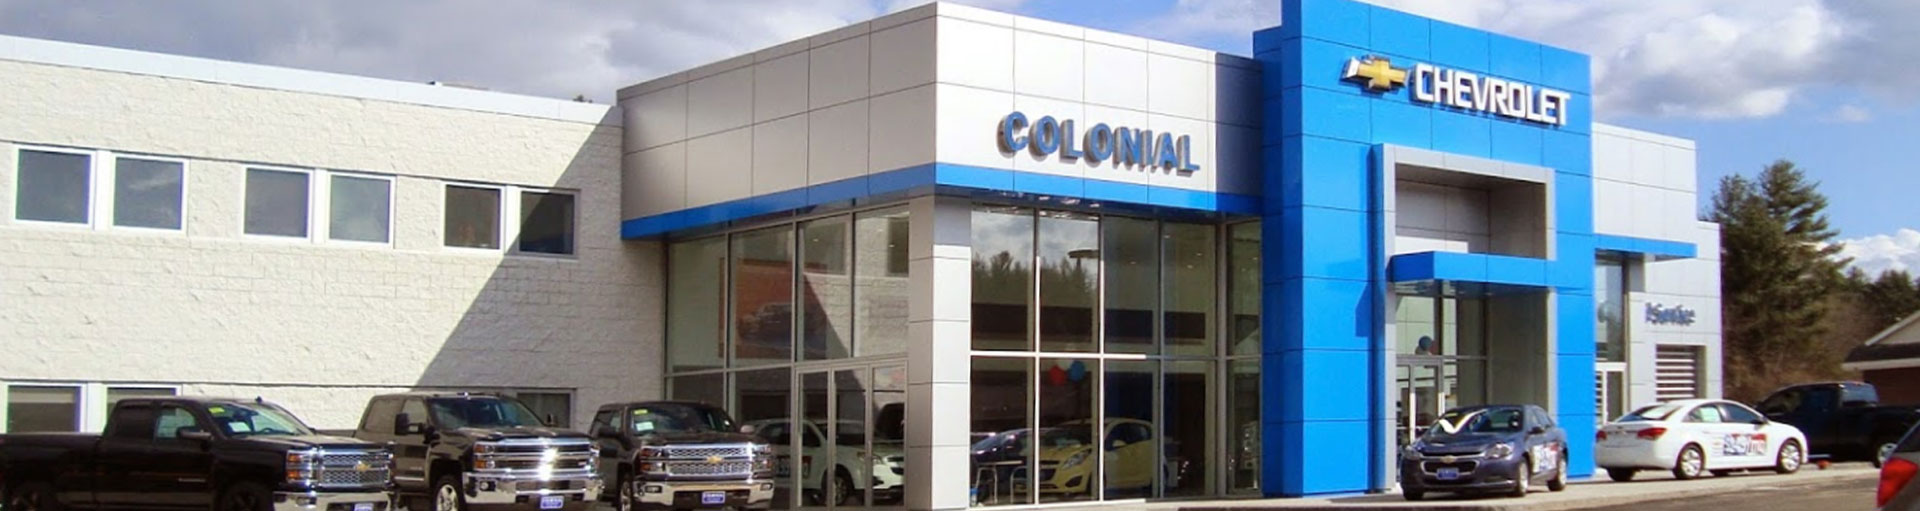 Colonial Chevrolet of Acton Service Department